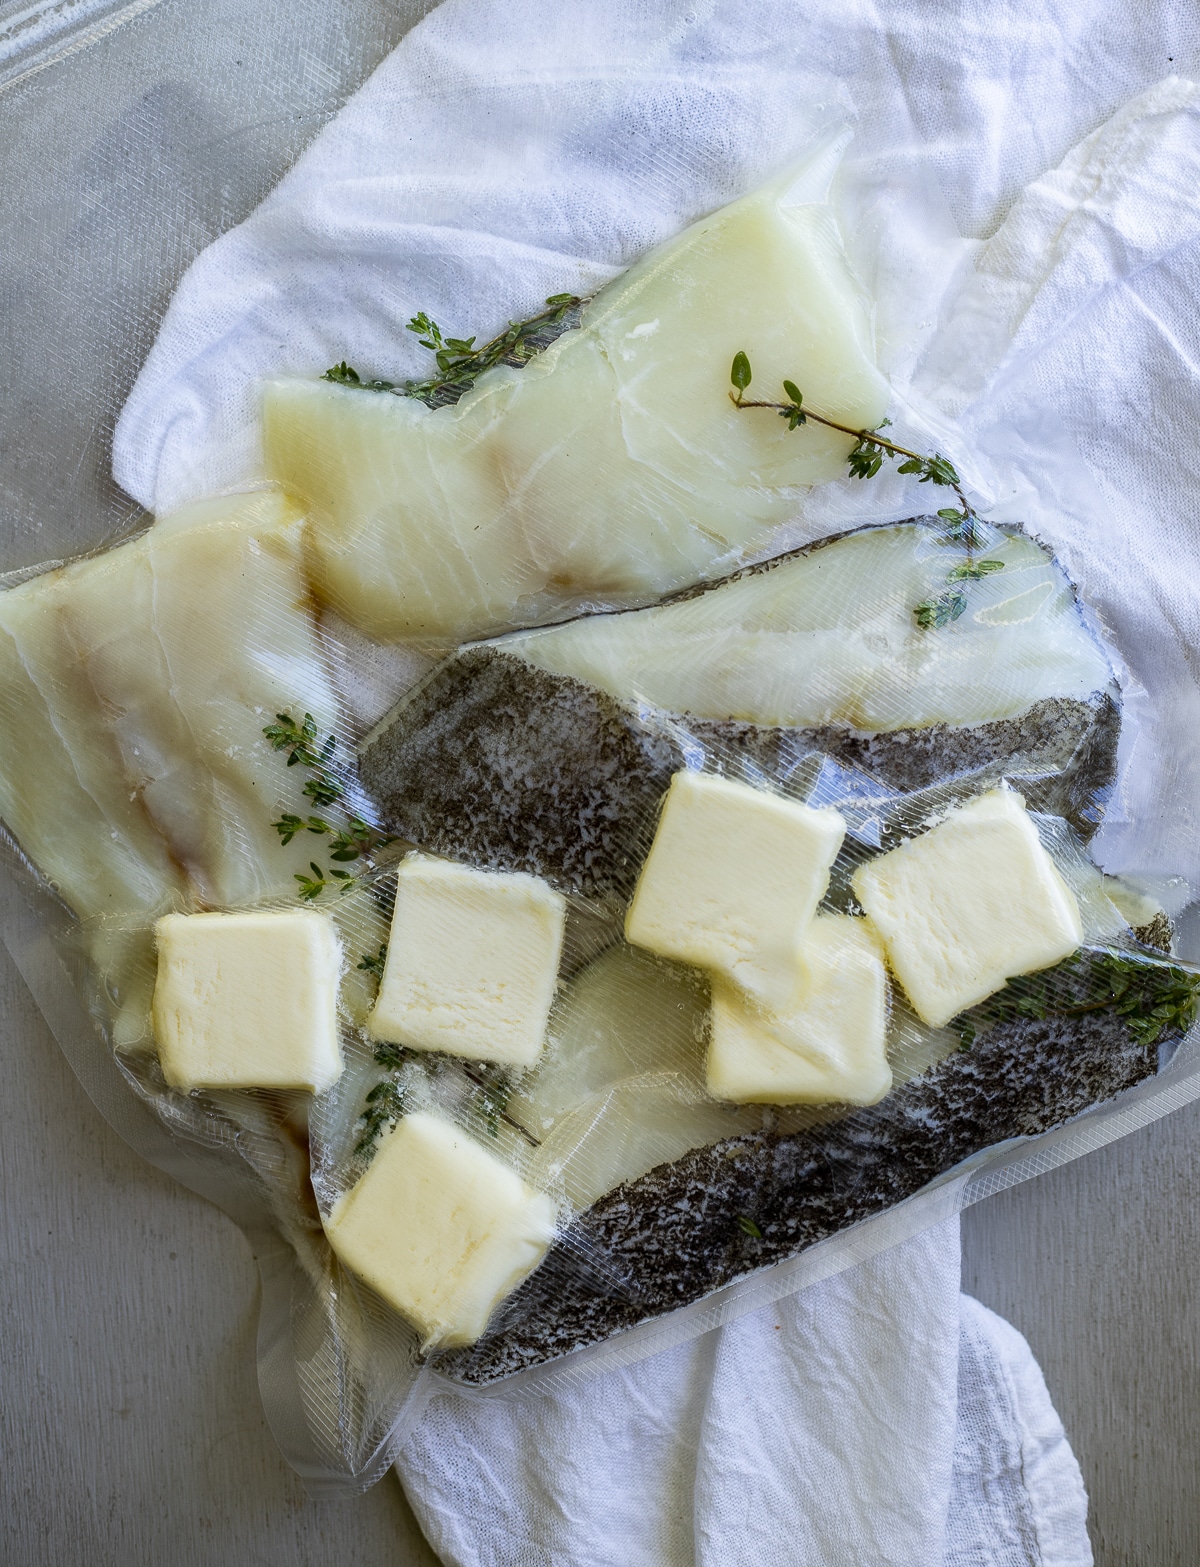 Halibut pieces sealed in a bag with butter and sprigs of thyme.